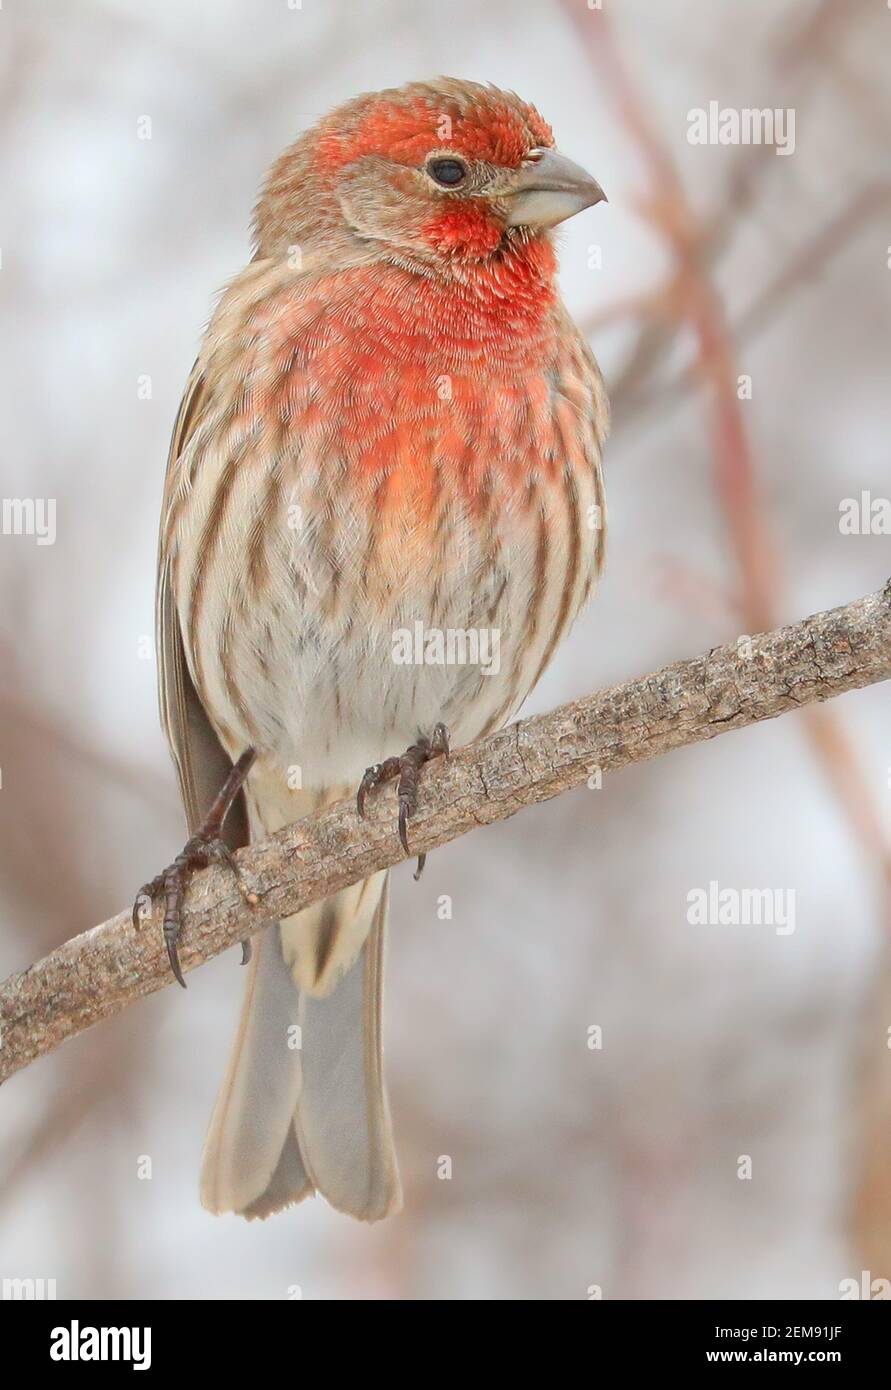 House finch sitting on a branch in winter, Quebec, Canada Stock Photo